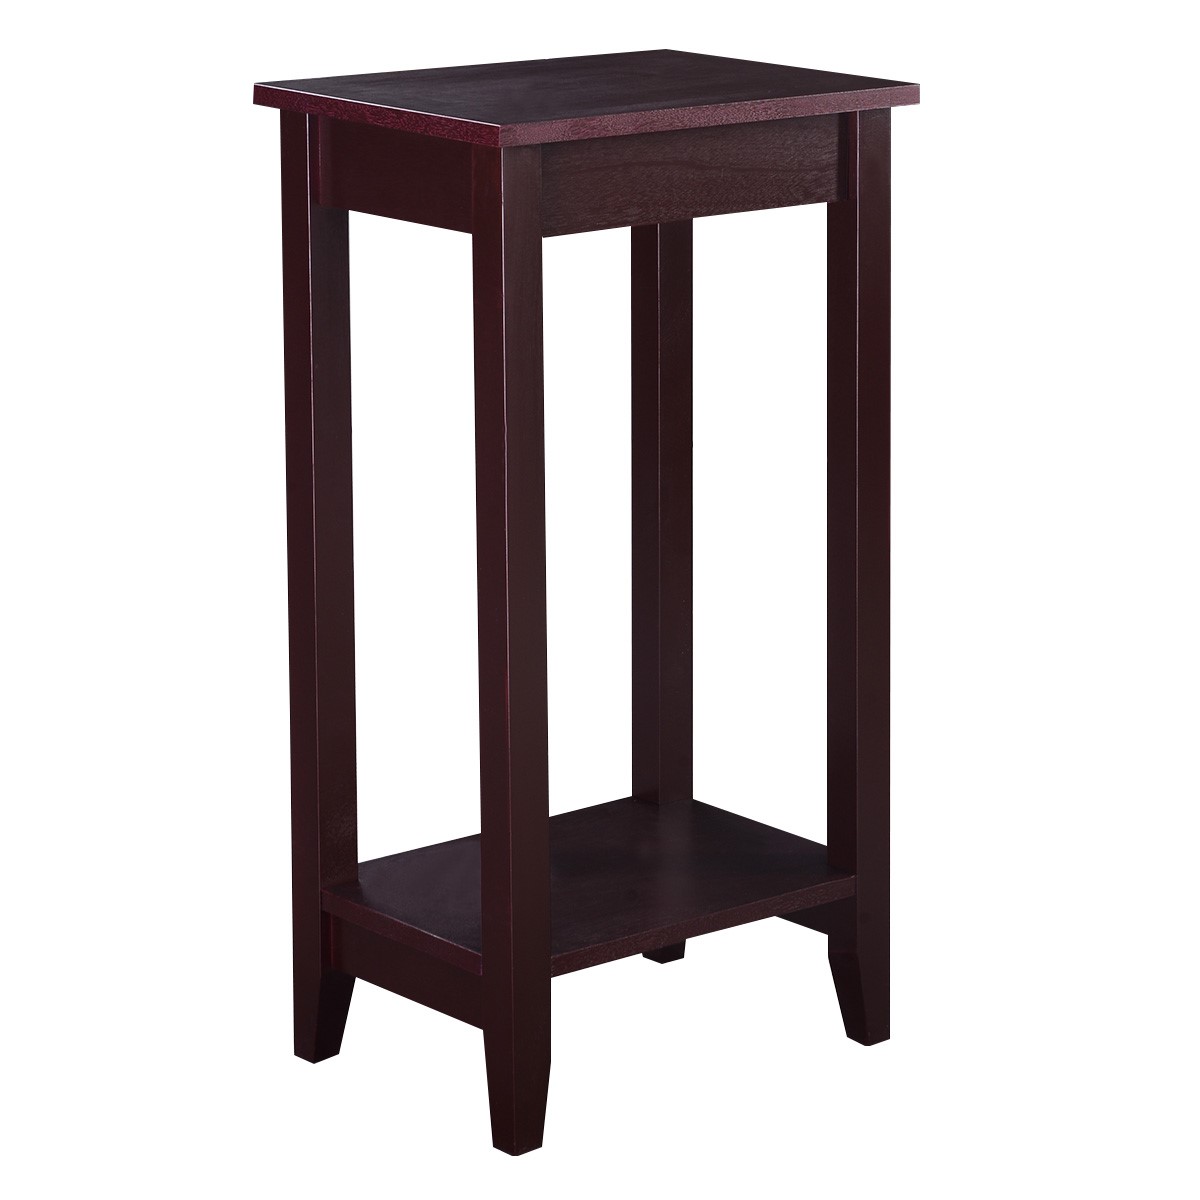 way tall end table coffee stand night side nightstand accent furniture brown tables tablecloth measurements battery bedside lamp round wood home goods sofa patio chair covers